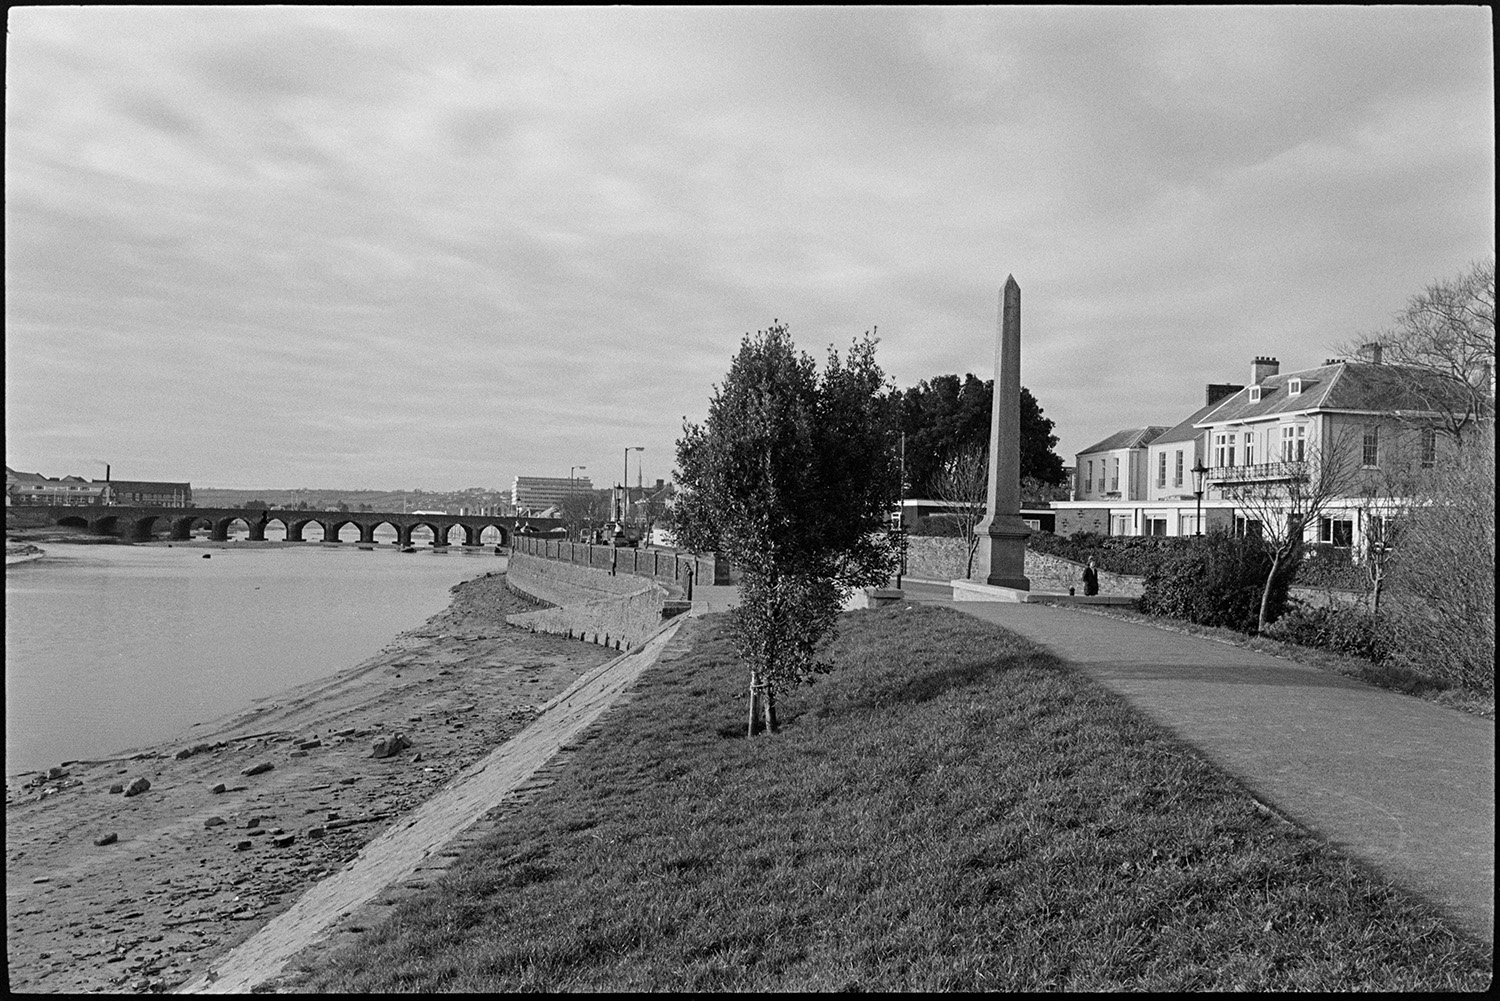 Towpath and bridge over Taw.
[View of the towpath beside the River Taw looking West towards the Long Bridge at Barnstaple, with an obelisk between the path and Taw Vale road.]